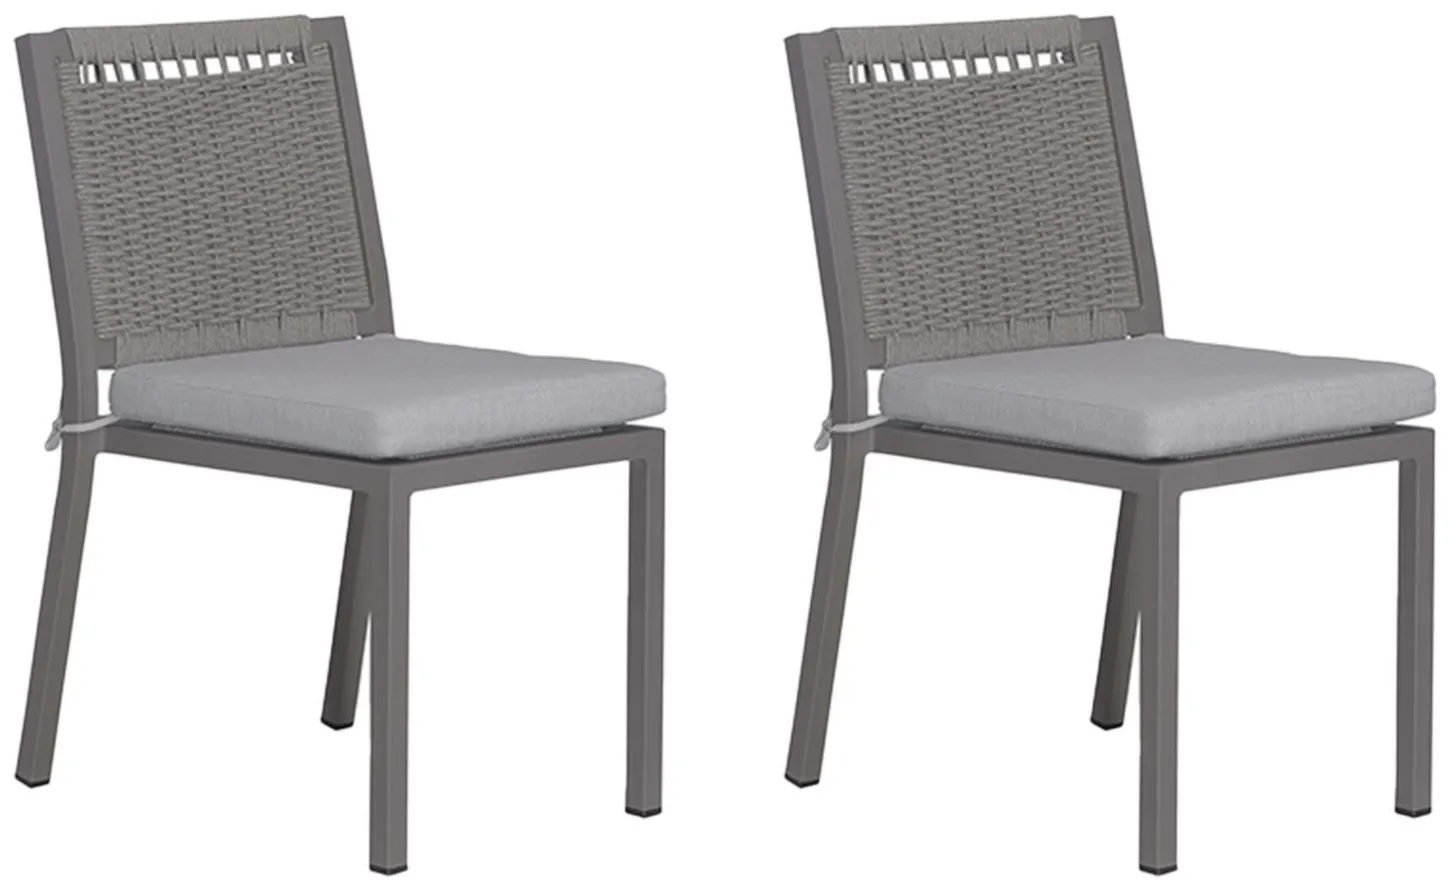 Plantation Key Outdoor Side Chairs - Set of 2 in Granite Finish by Liberty Furniture